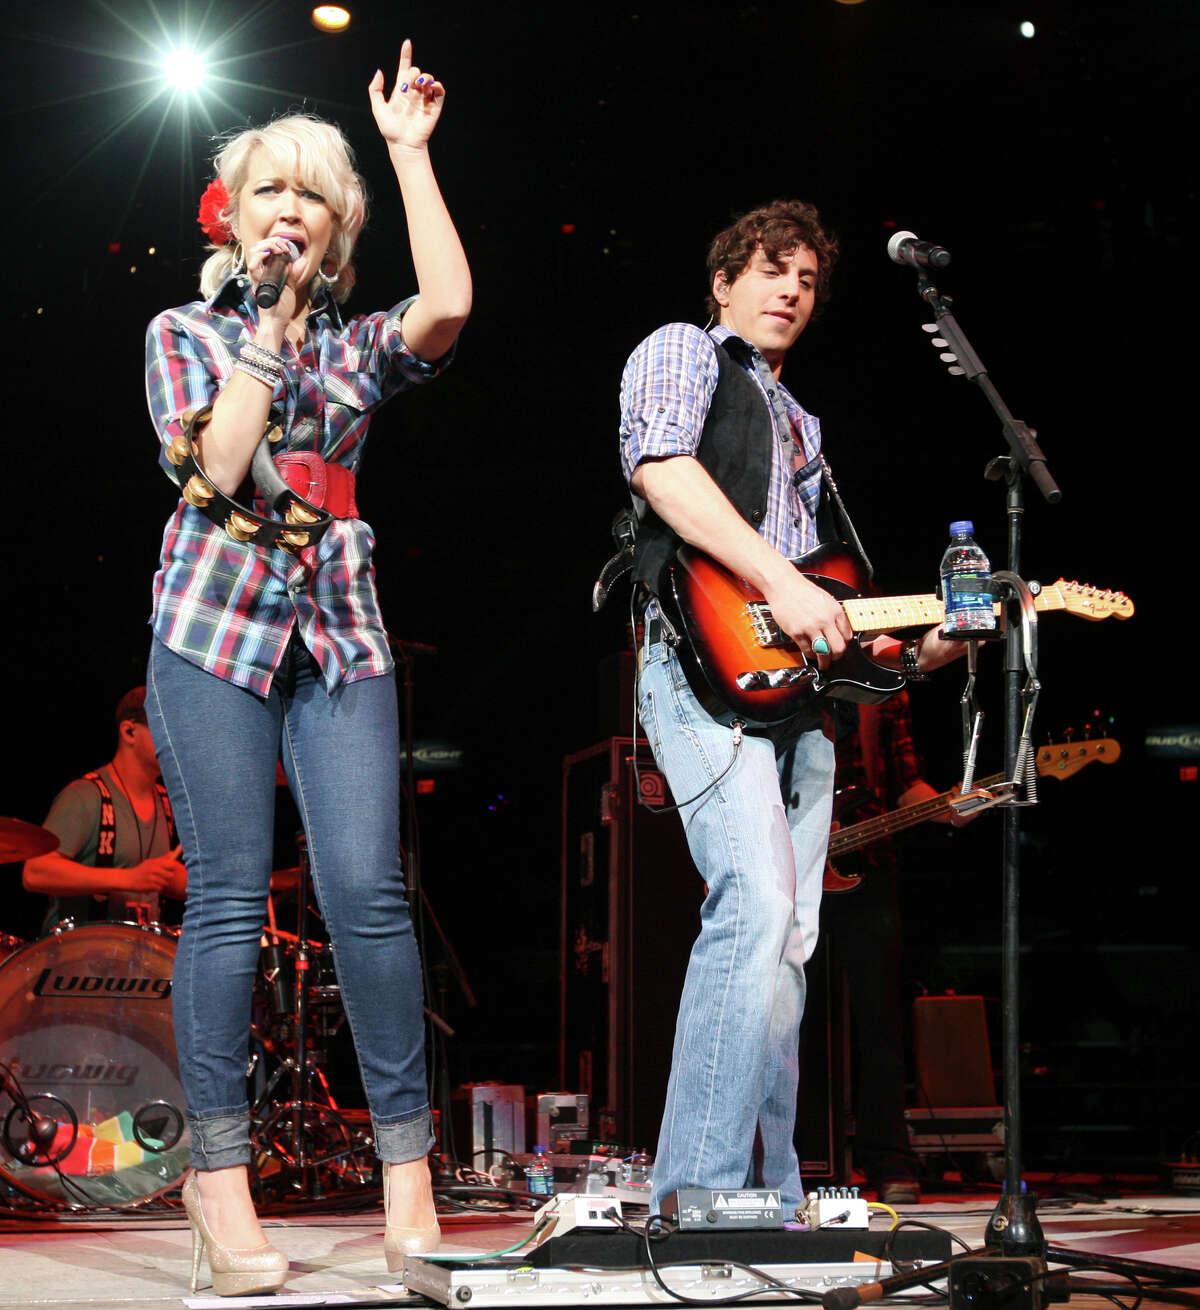 Steel Magnolia's Meghan Linsey (left) and Joshua Scott Jones perform Sunday Feb. 13, 2011 during the San Antonio Stock Show & Rodeo at the AT&T Center.